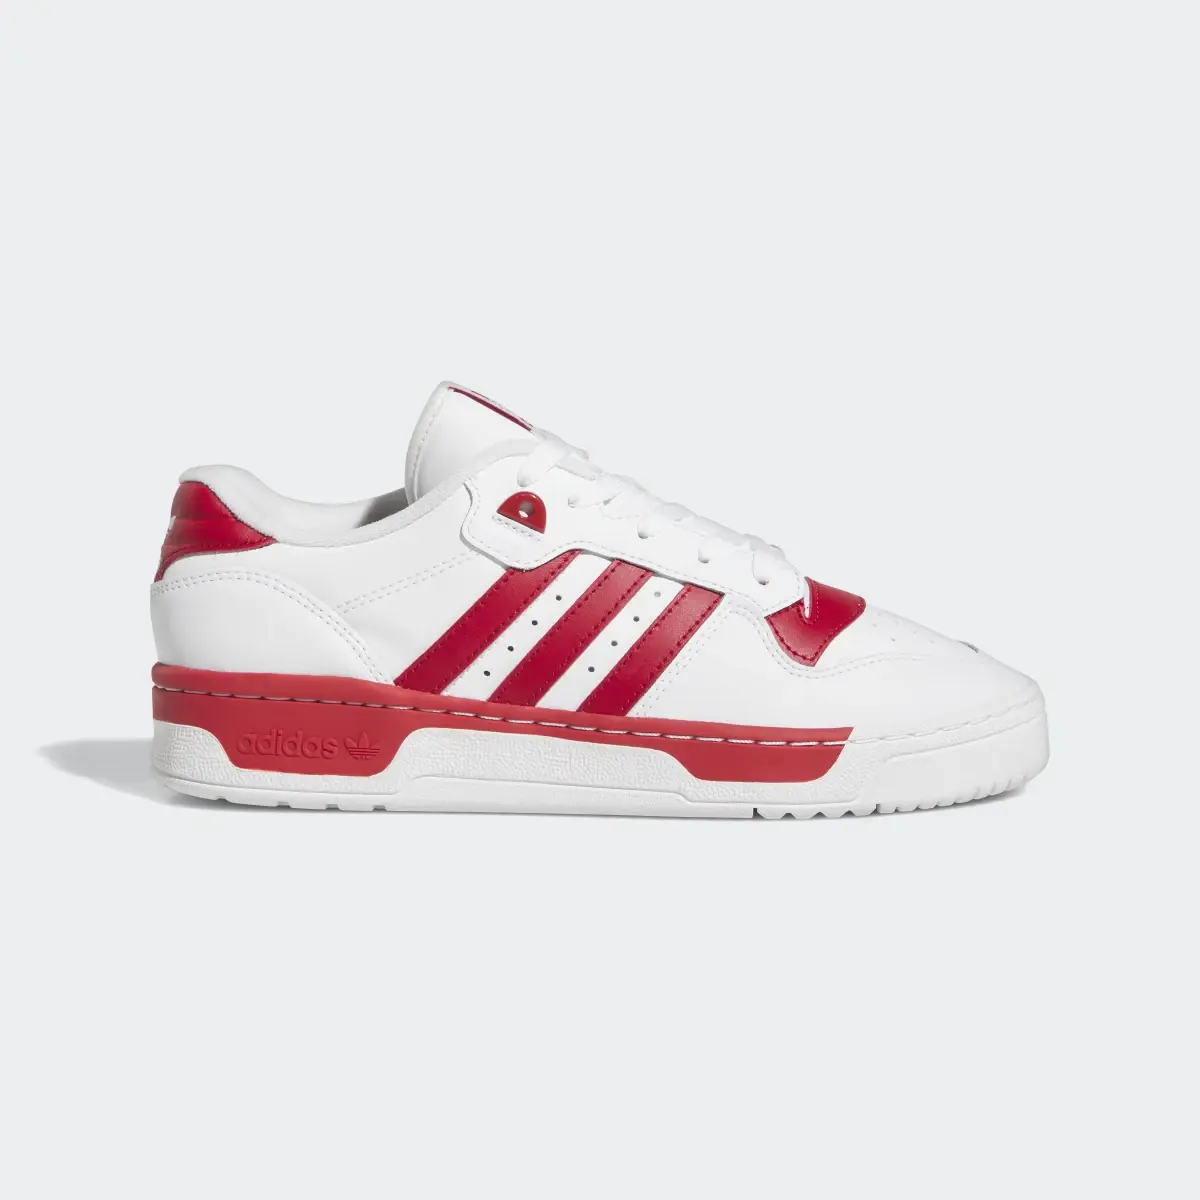 Adidas Rivalry Low Shoes. 2